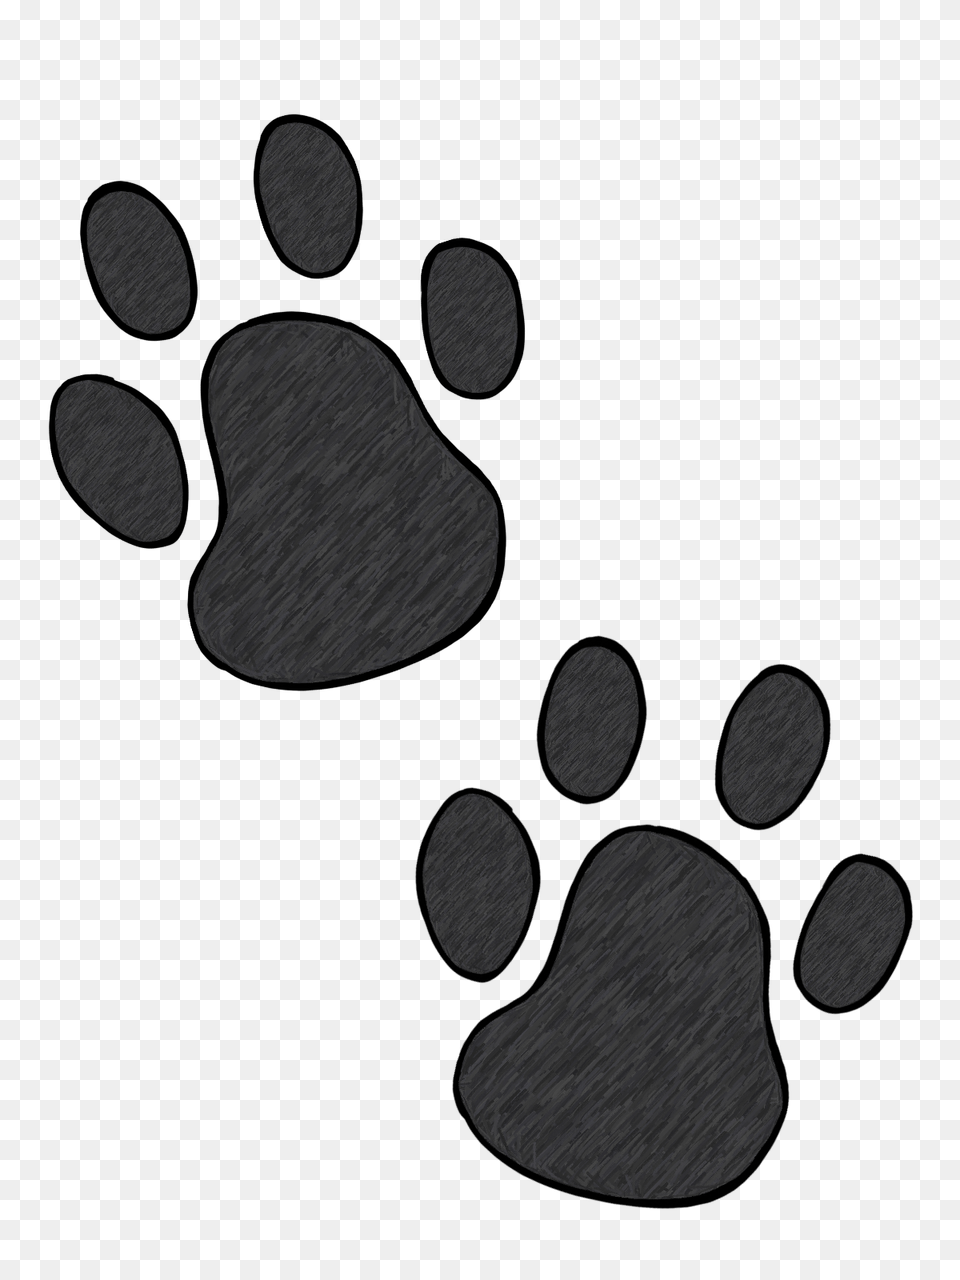 Paw Print Graphic, Footprint Png Image